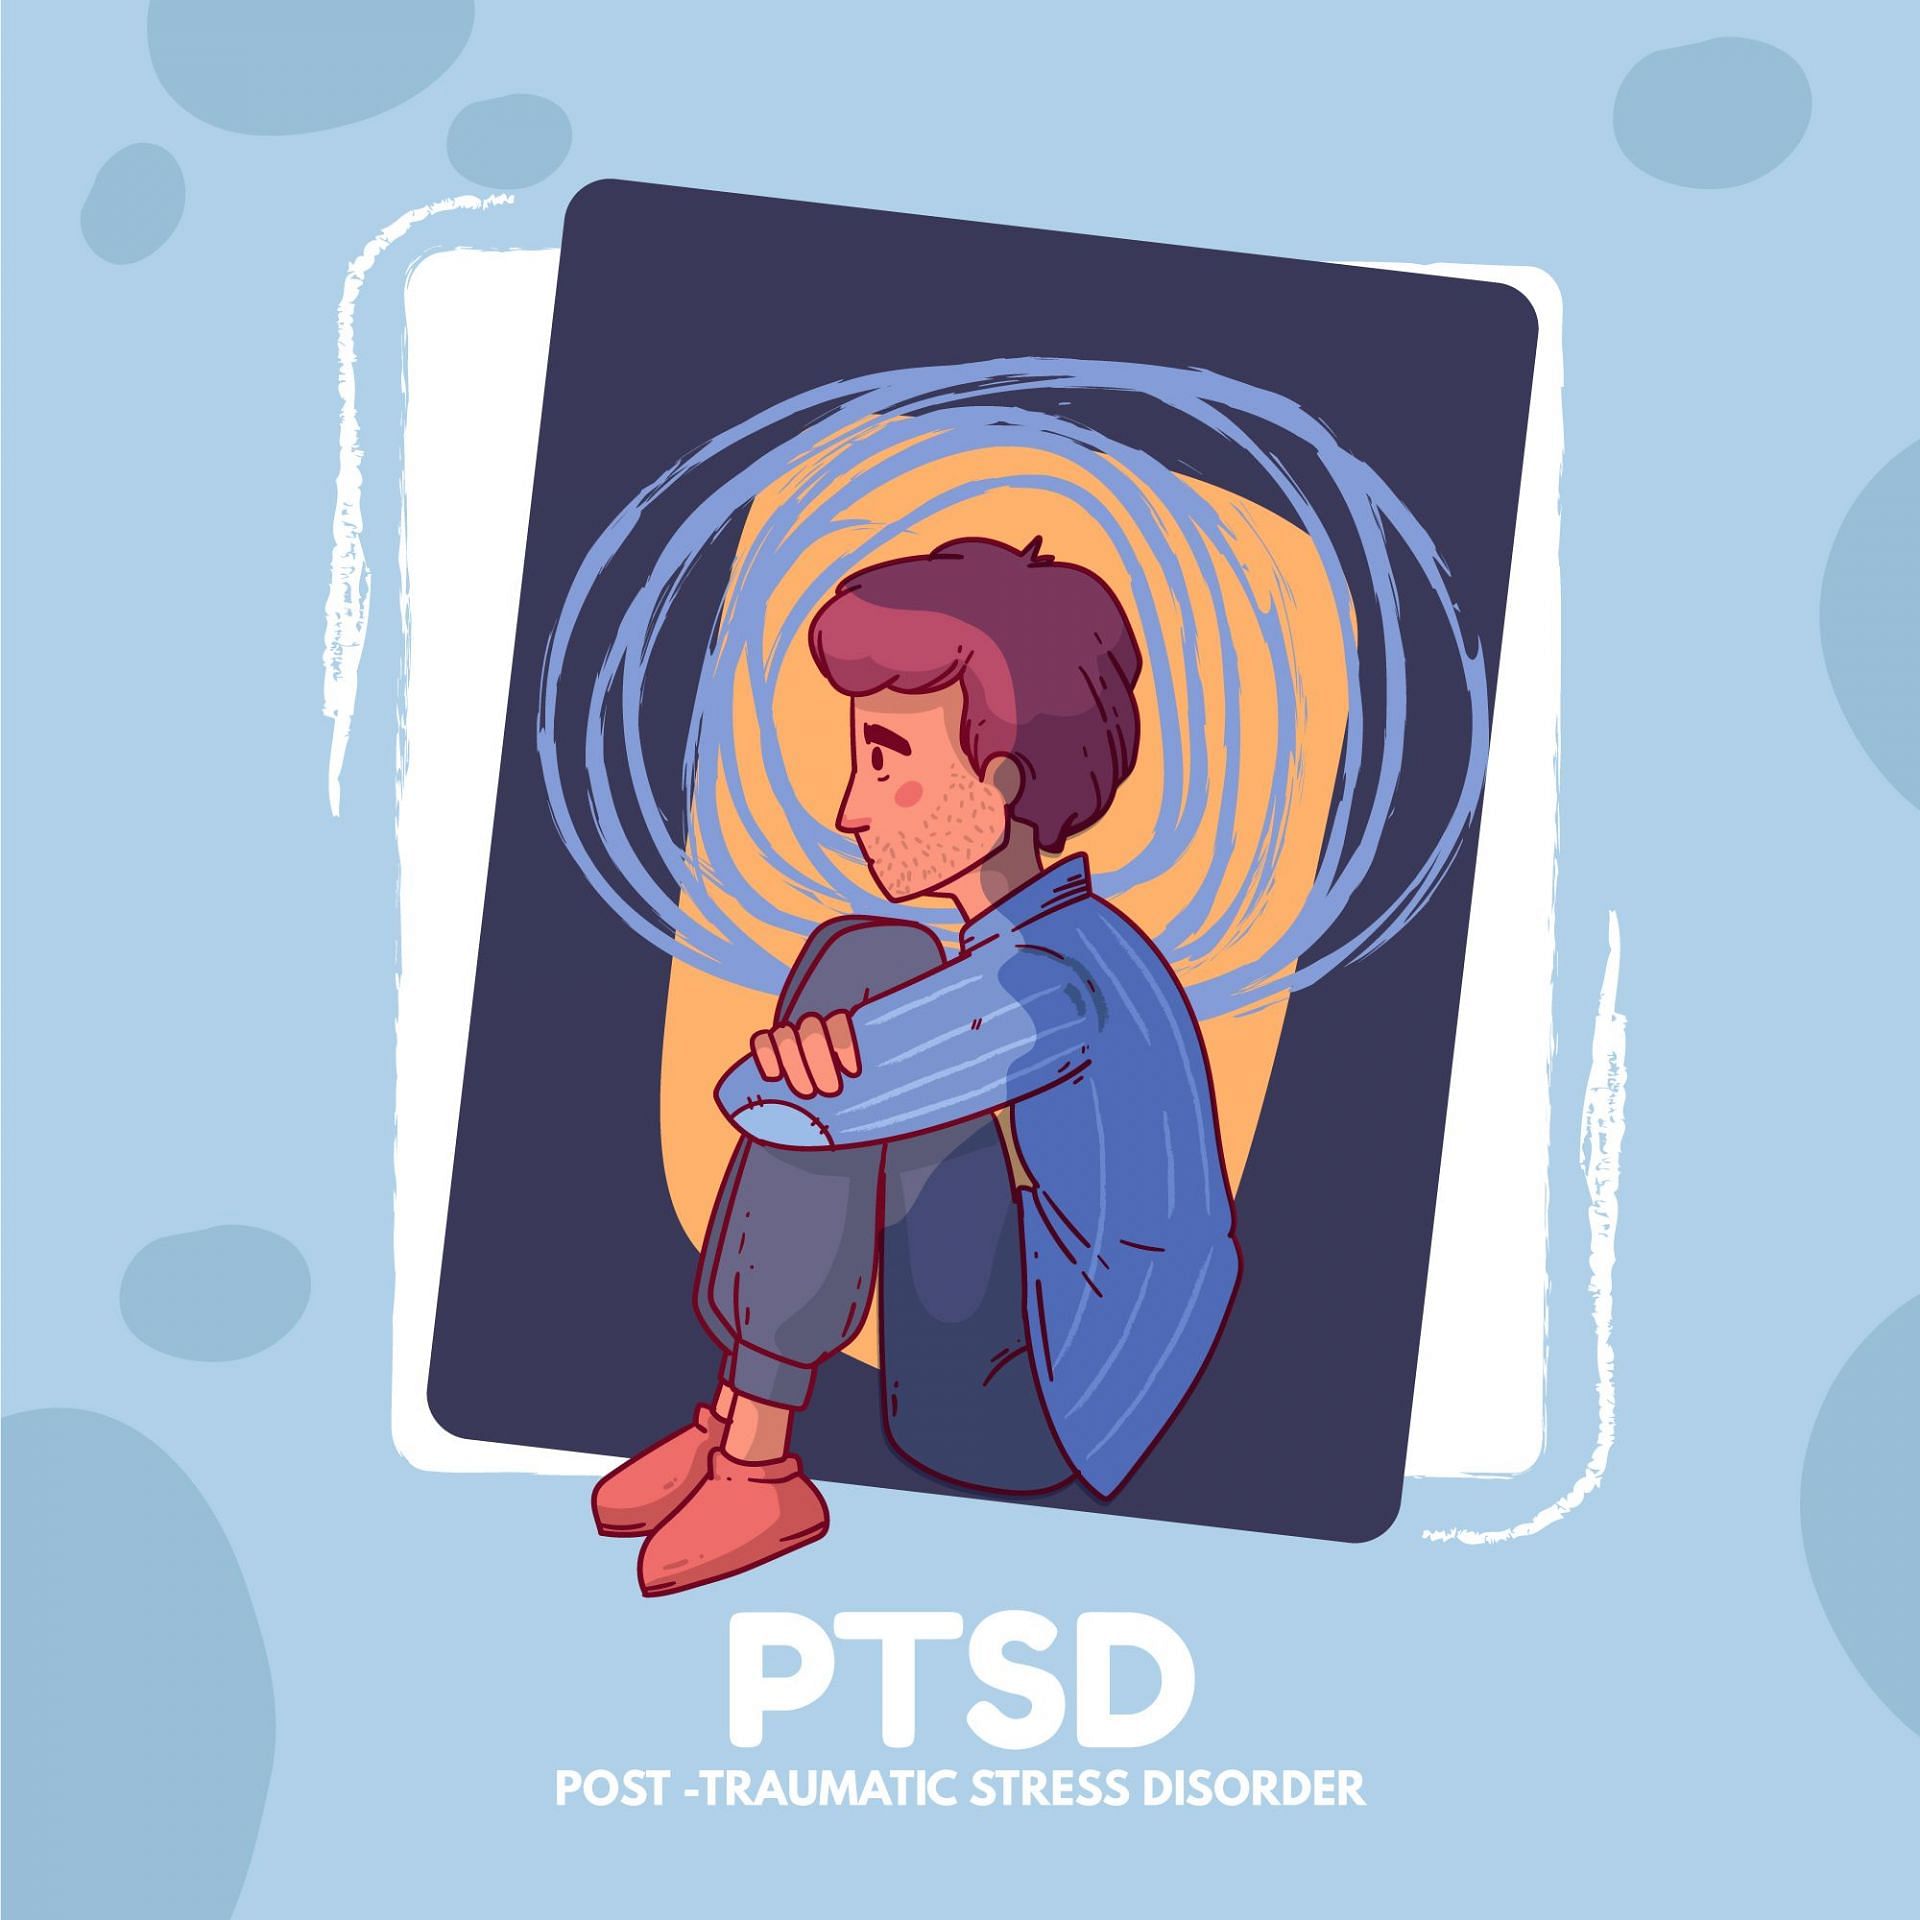 It can be very difficult to deal with PTSD without support. (Image via Freepik/ Freepik)